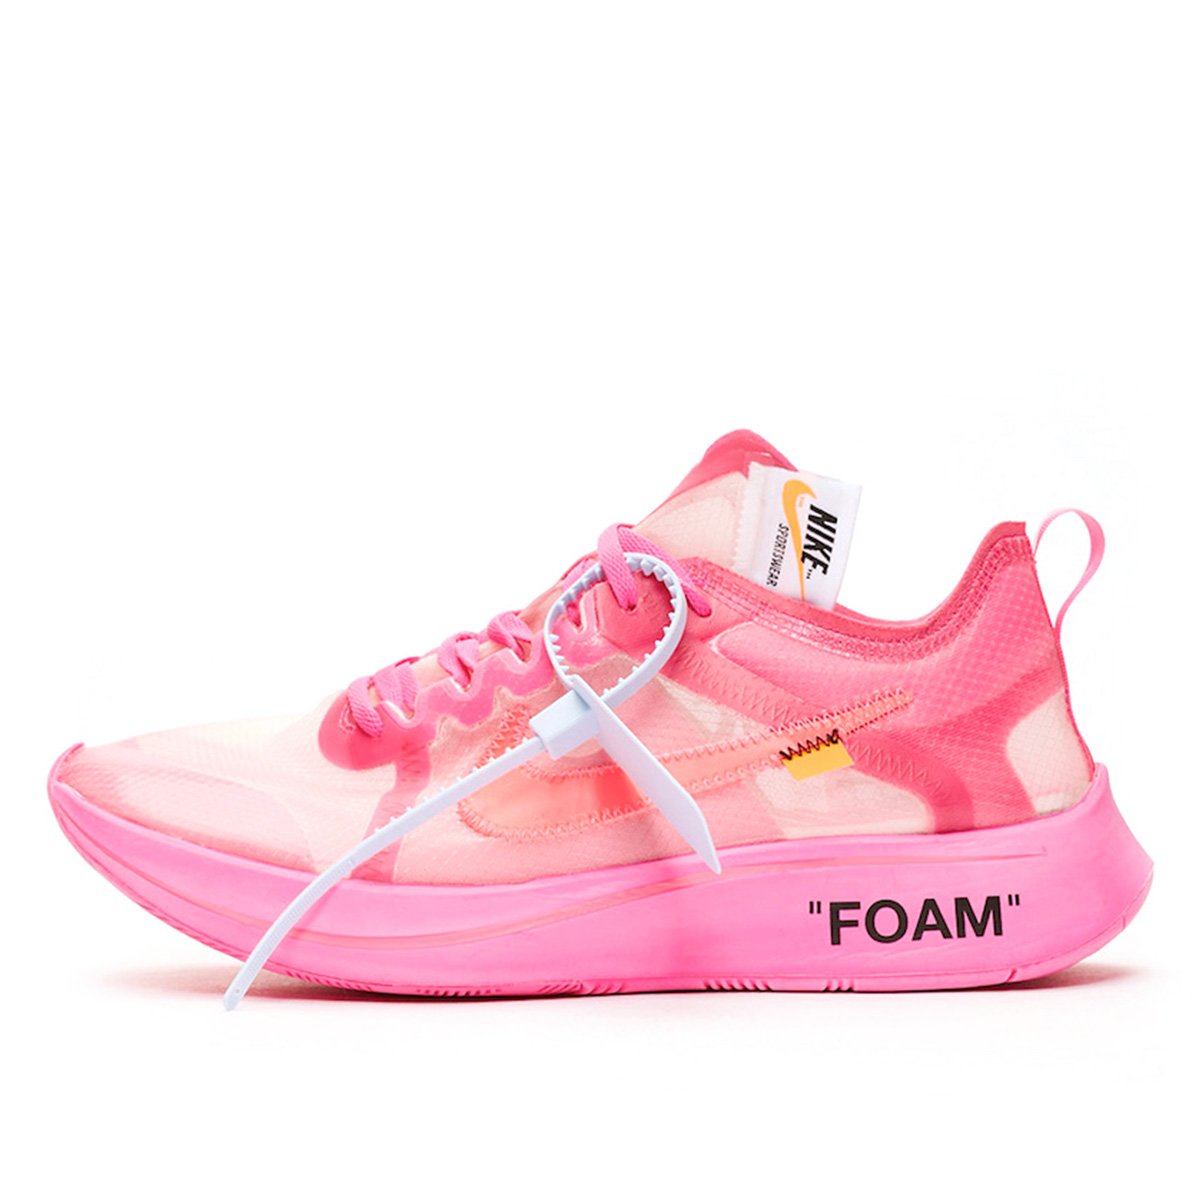 Off-White x Zoom Fly SP "Tulip Pink"